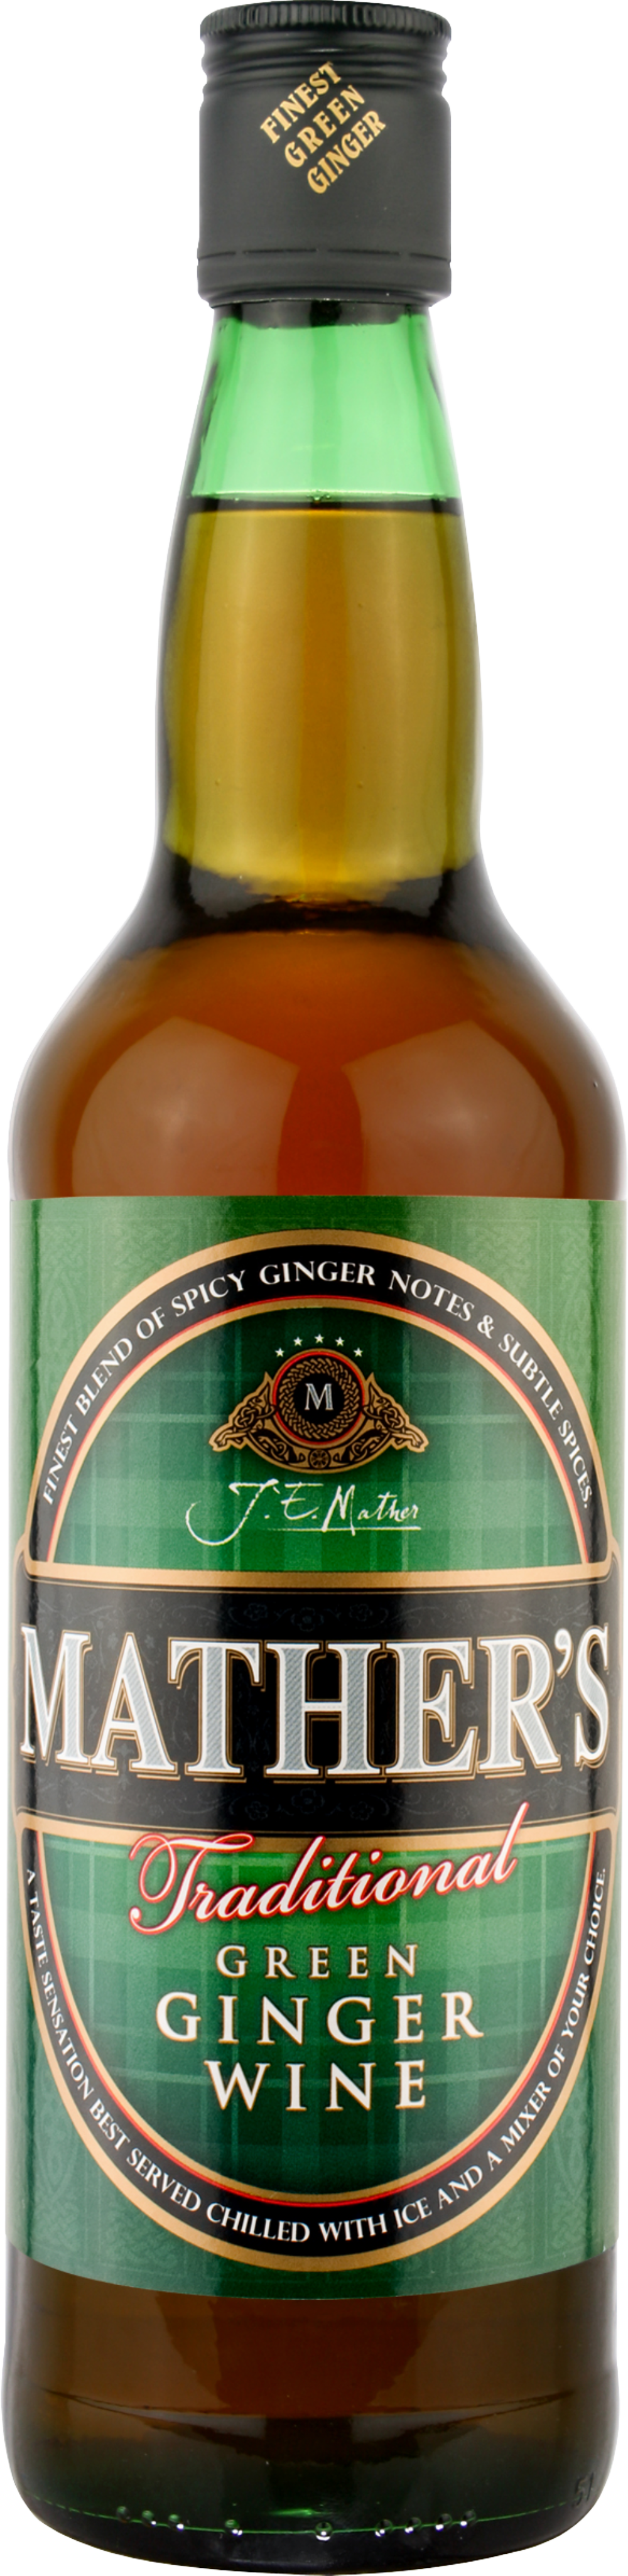 Mathers Ginger Wine 70cl